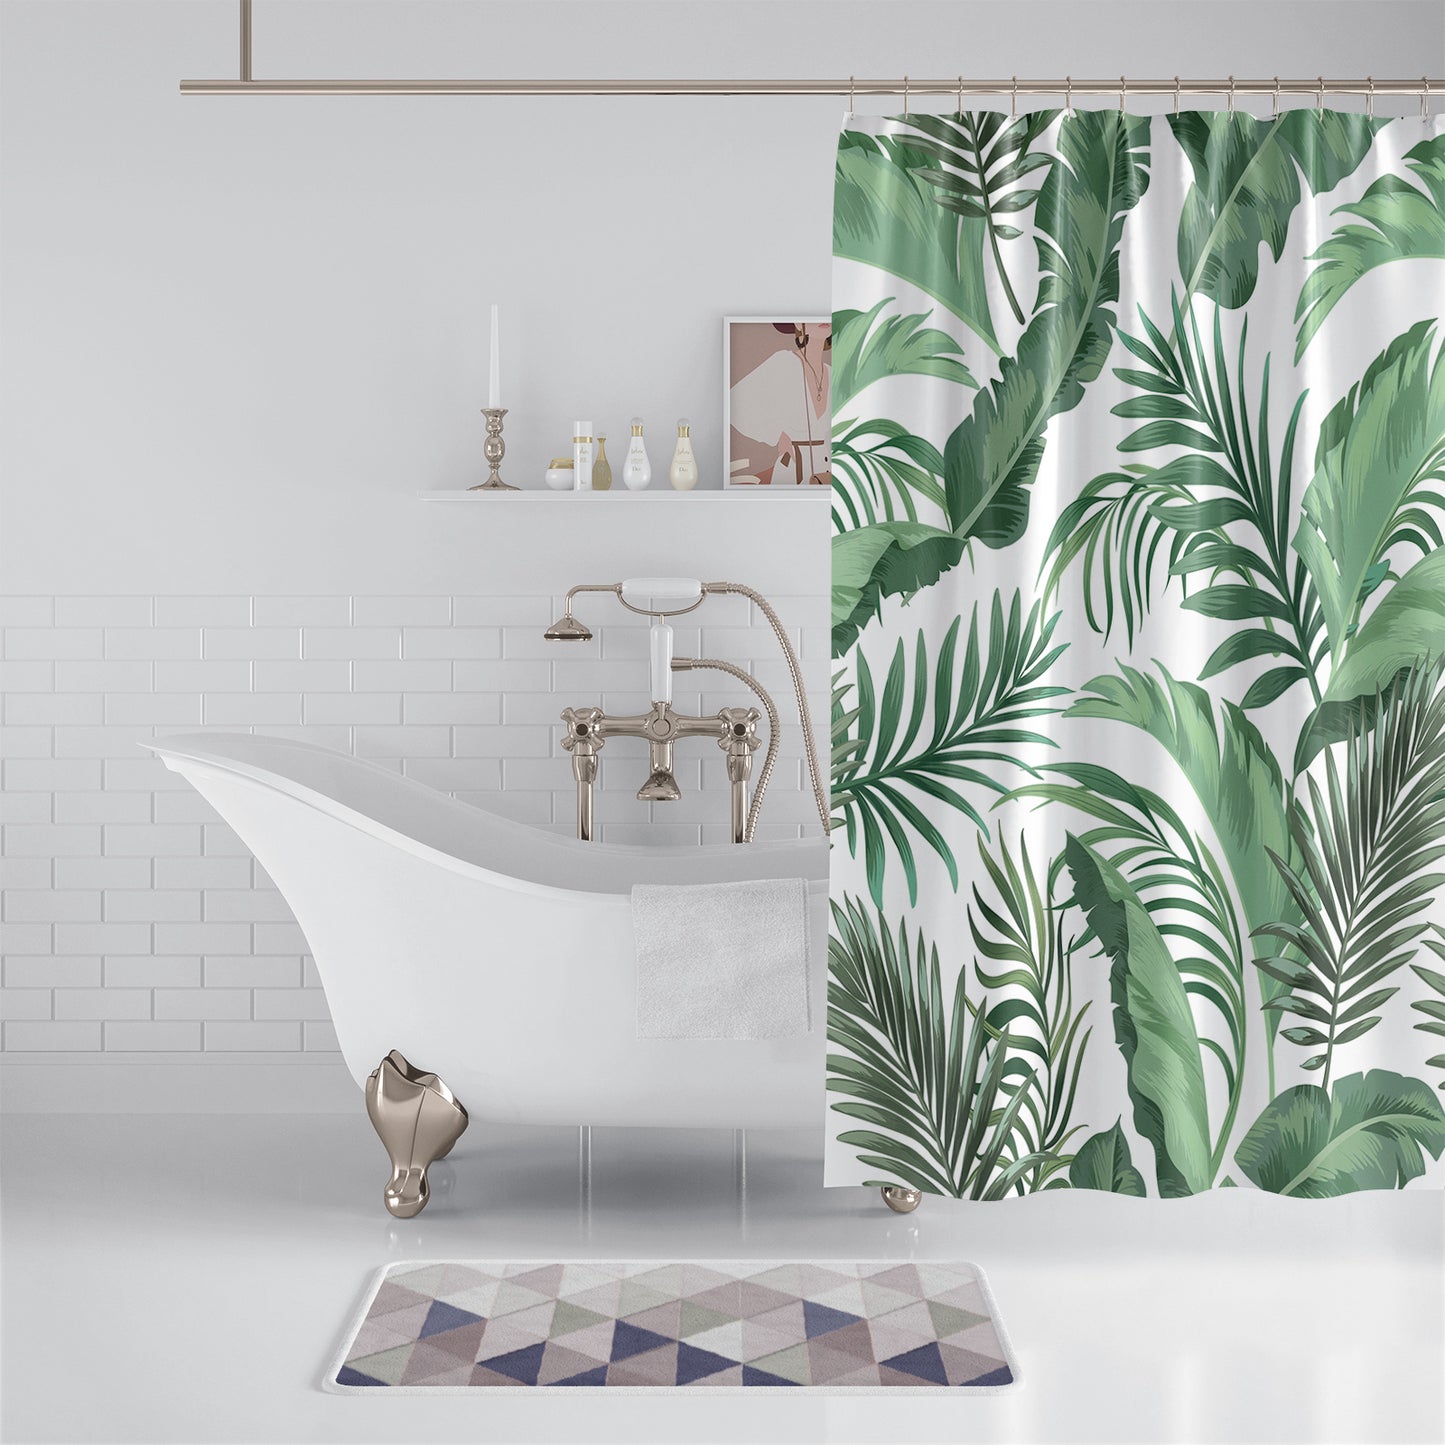 Wongs Bedding Leaves Pattern Mould Proof Resistan Polyester Fabric Shower Curtain